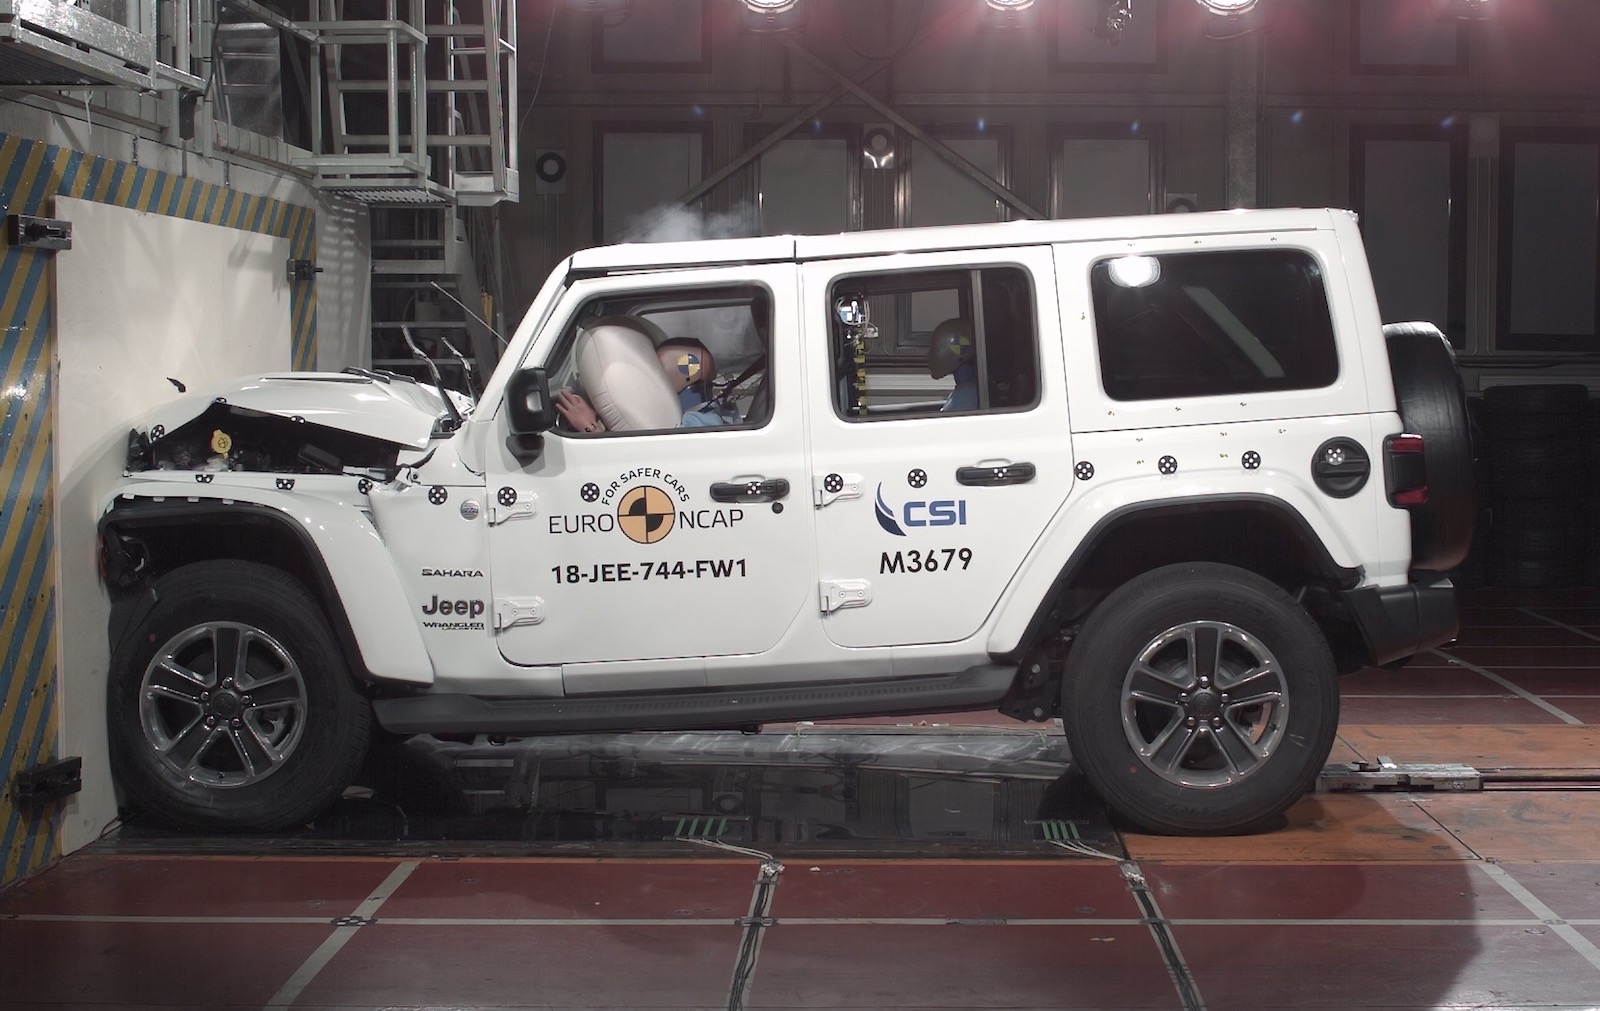 2019 Jeep Wrangler gets terrible 1-star NCAP safety rating